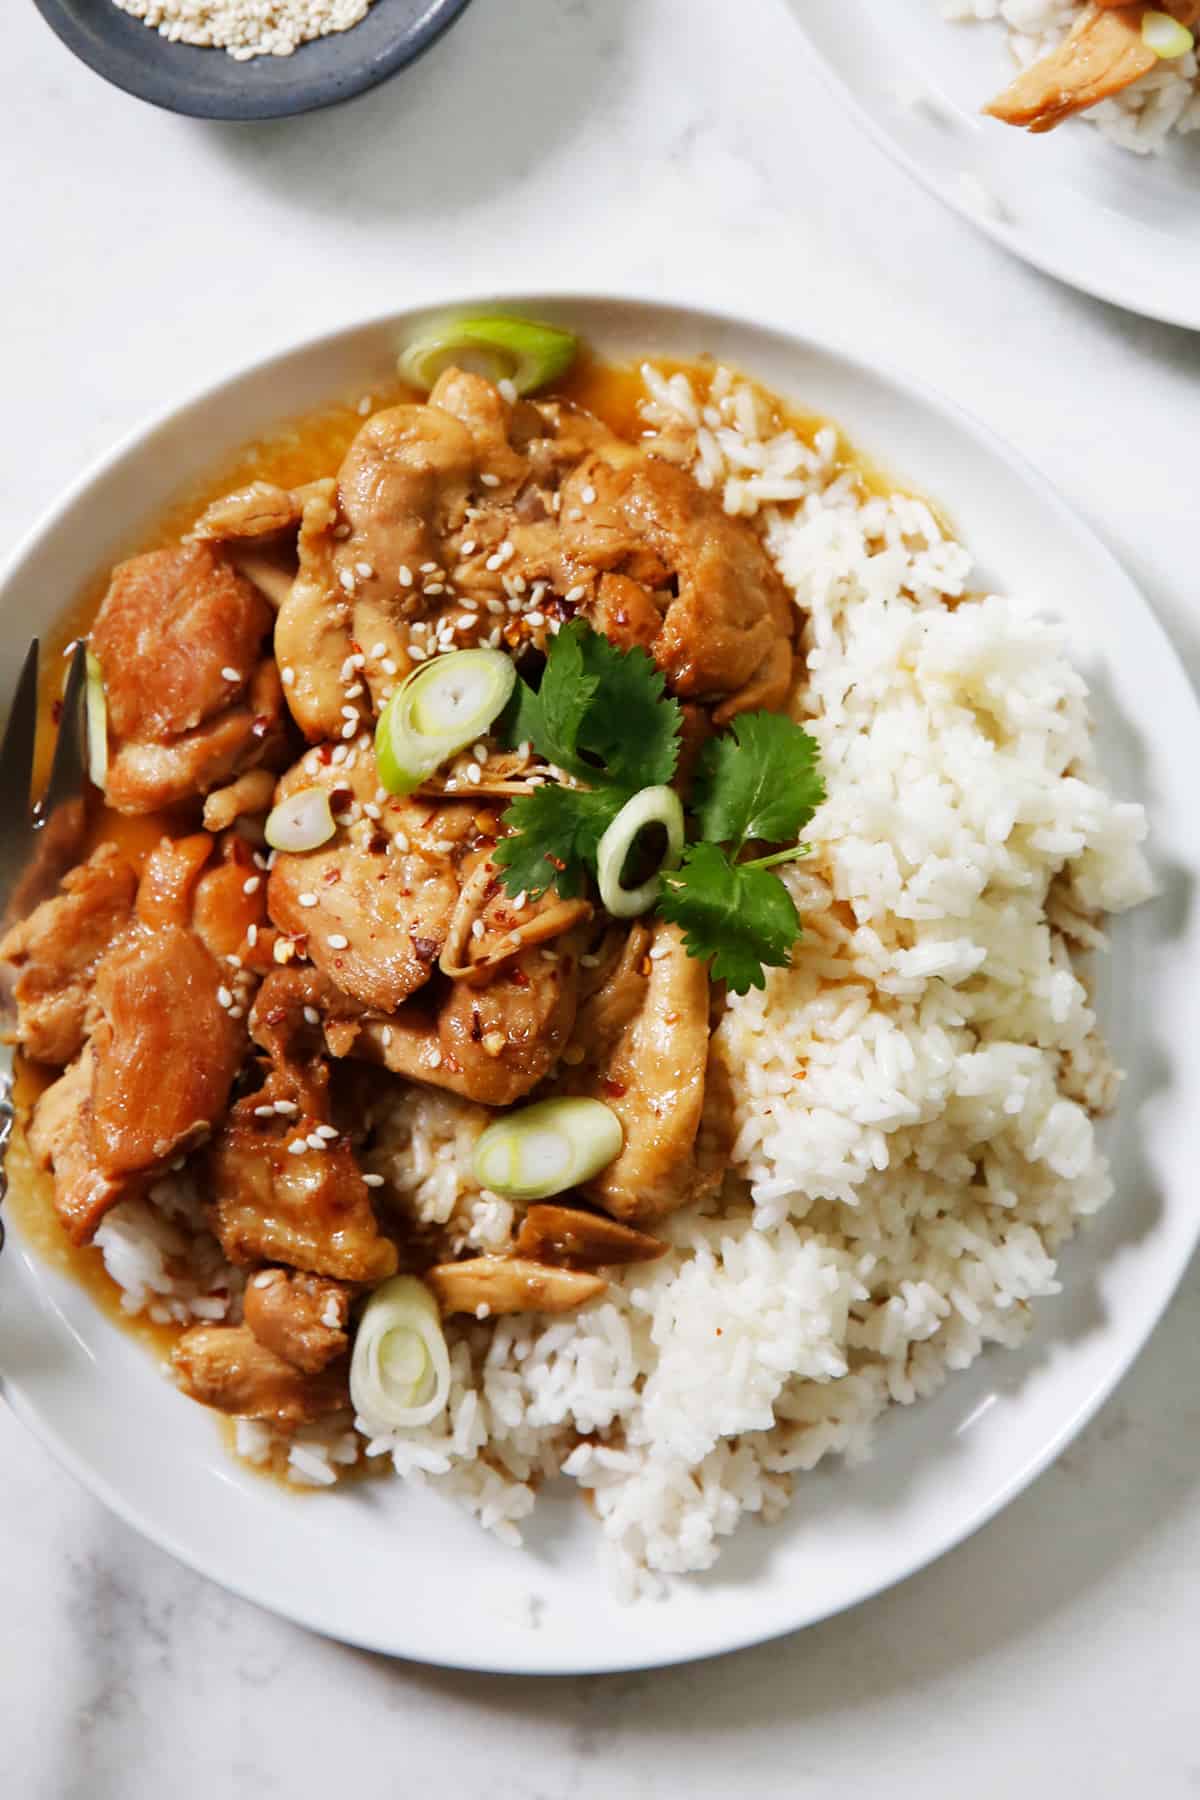 Chicken teriyaki recipe cooked in the instant pot